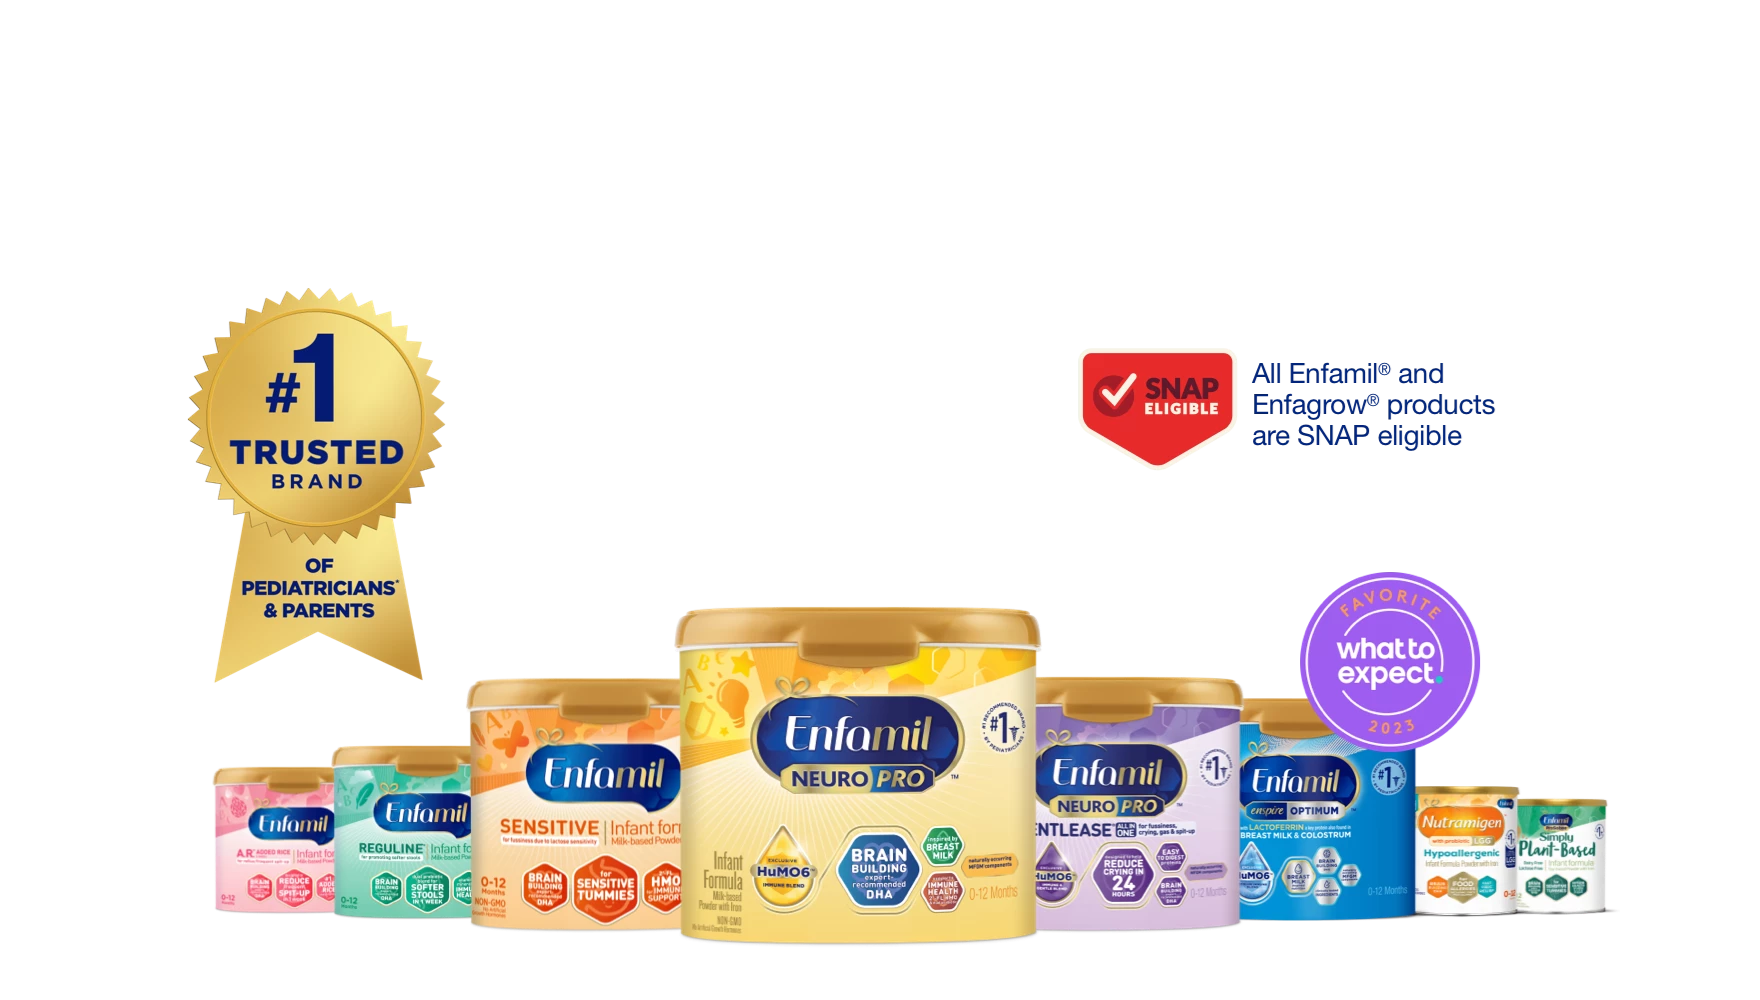 Lineup of Enfamil Family of Formulas that are #1 trusted brand of pediatricians and parents, as well as all Enfamil and Enfagrow products are SNAP Eligible, and a 2023 What to Expect Favorite